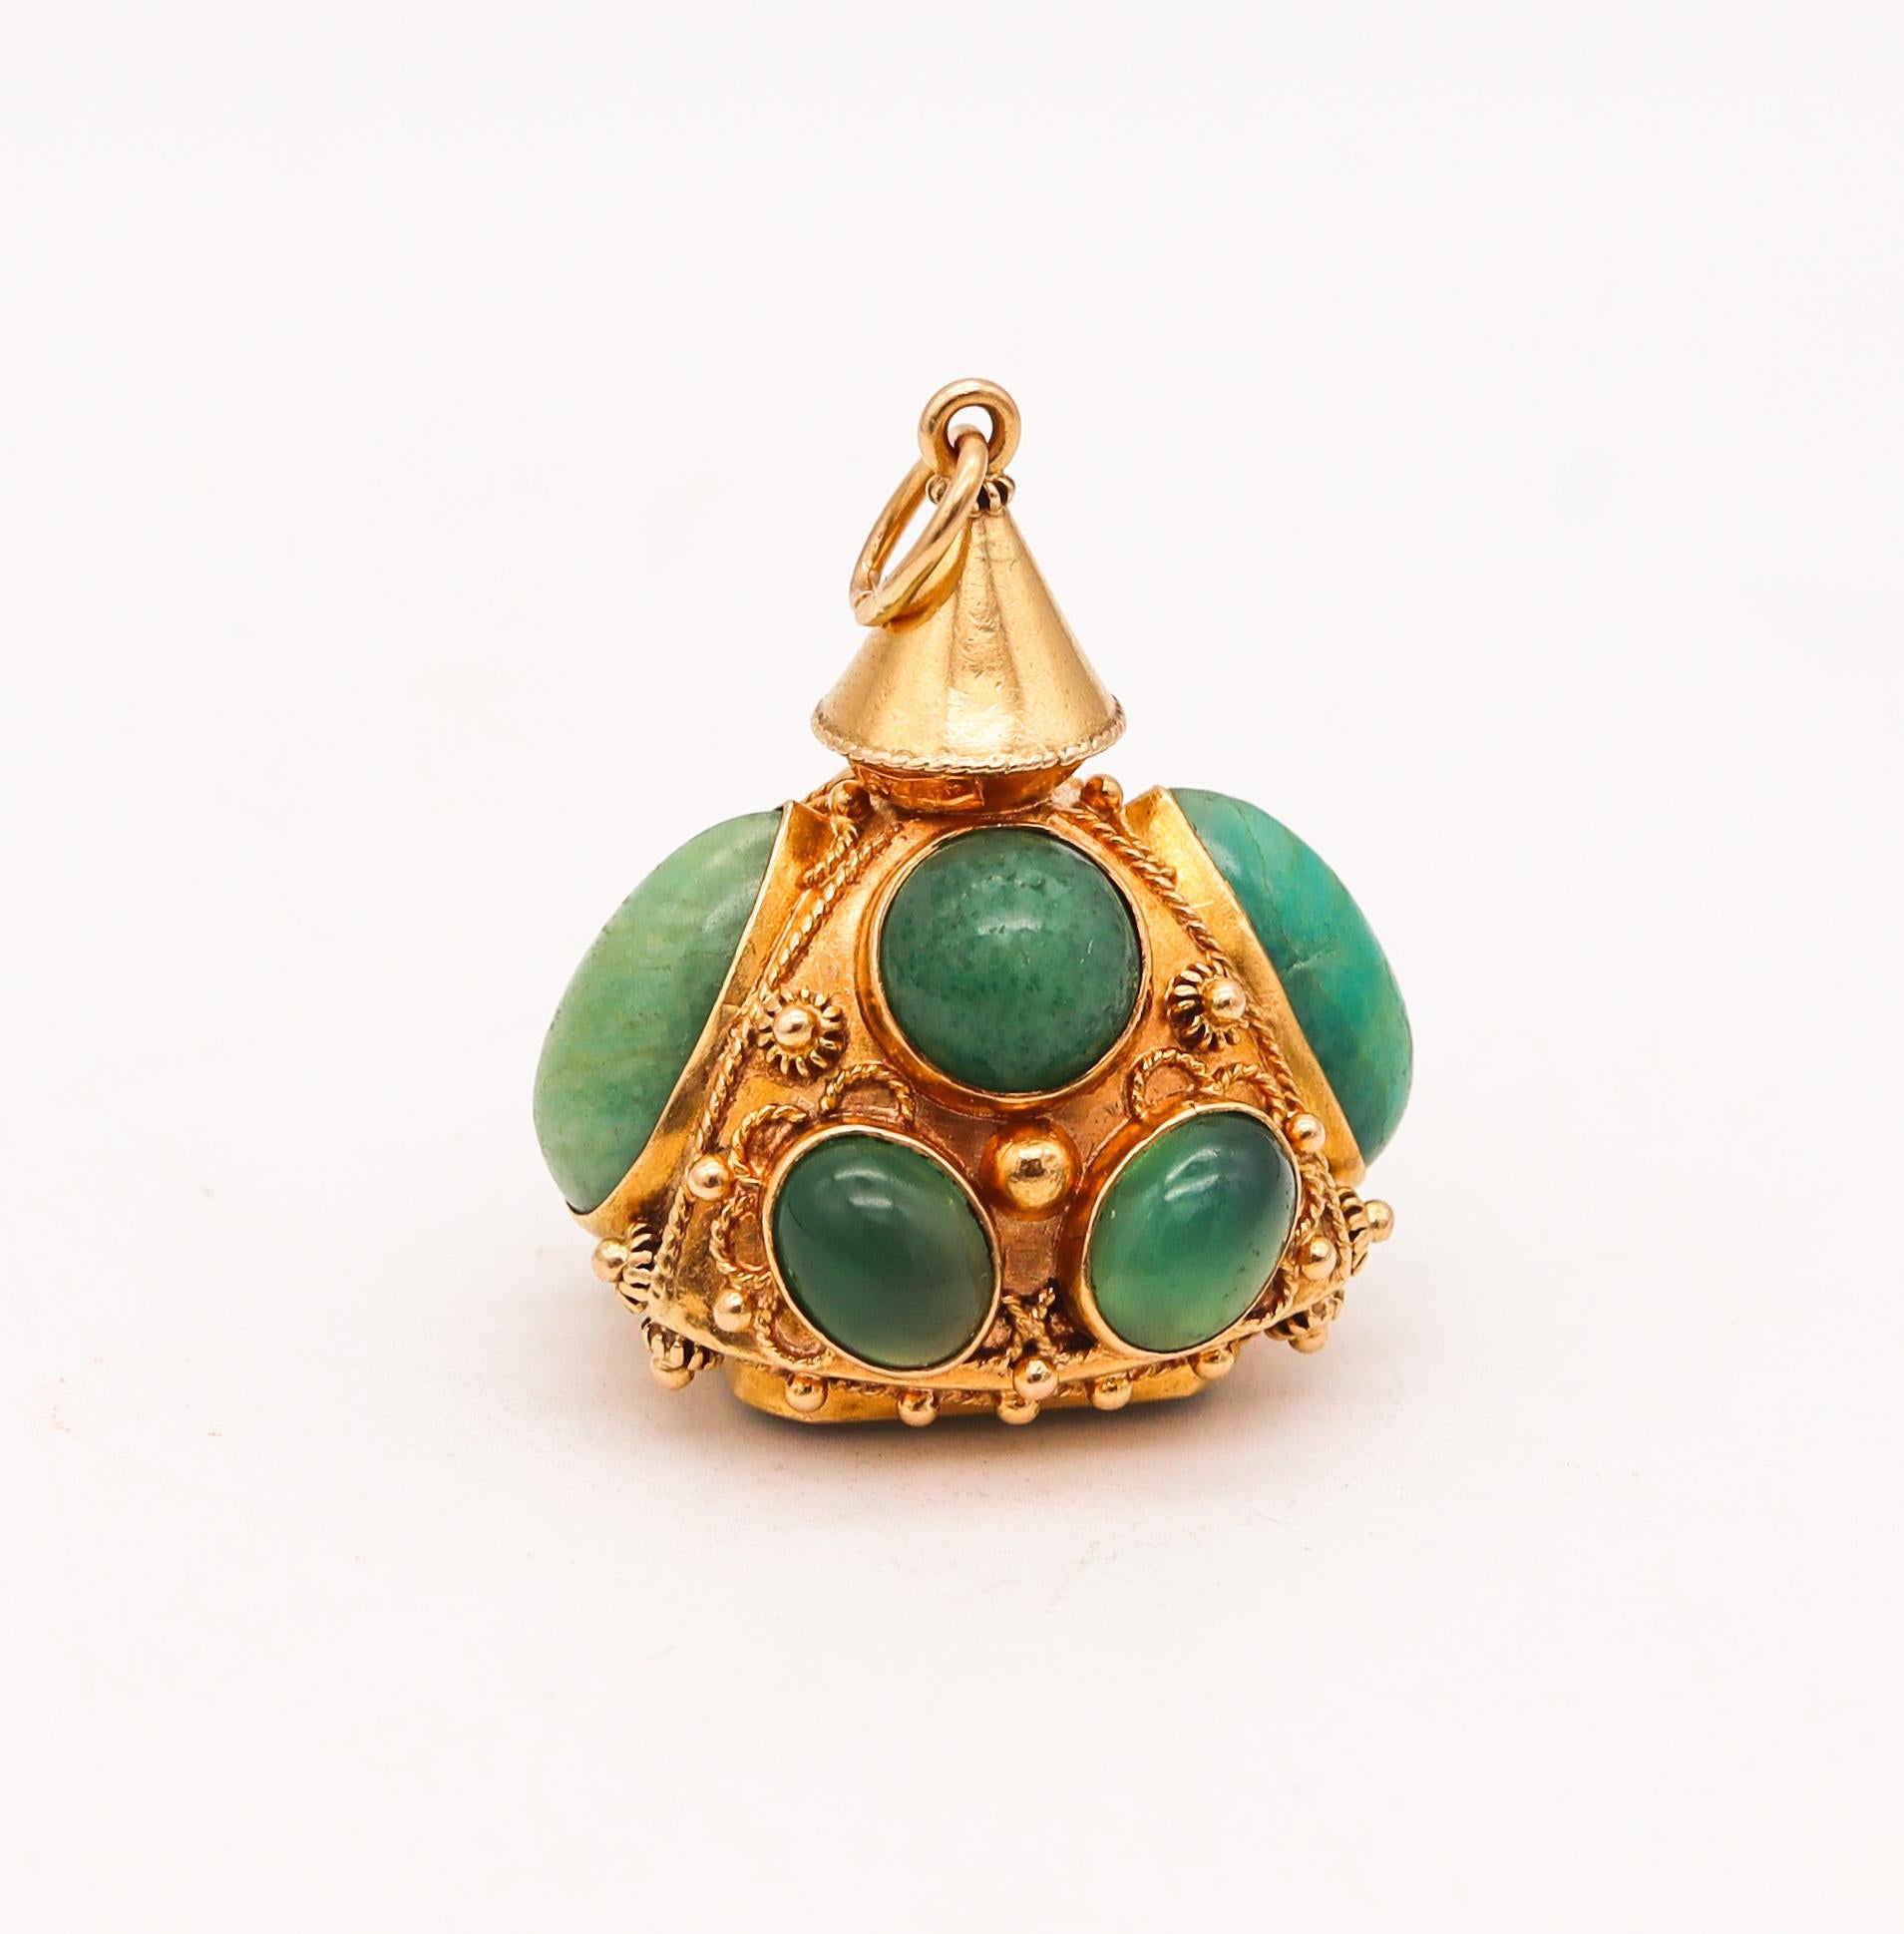 Italian mid century gem set vintage charm.

An Etruscan revival piece, created in Italy during the mid century period, circa 1960. This beautiful charm pendant has been crafted in solid yellow gold of 18 karats with polished and textured finish.